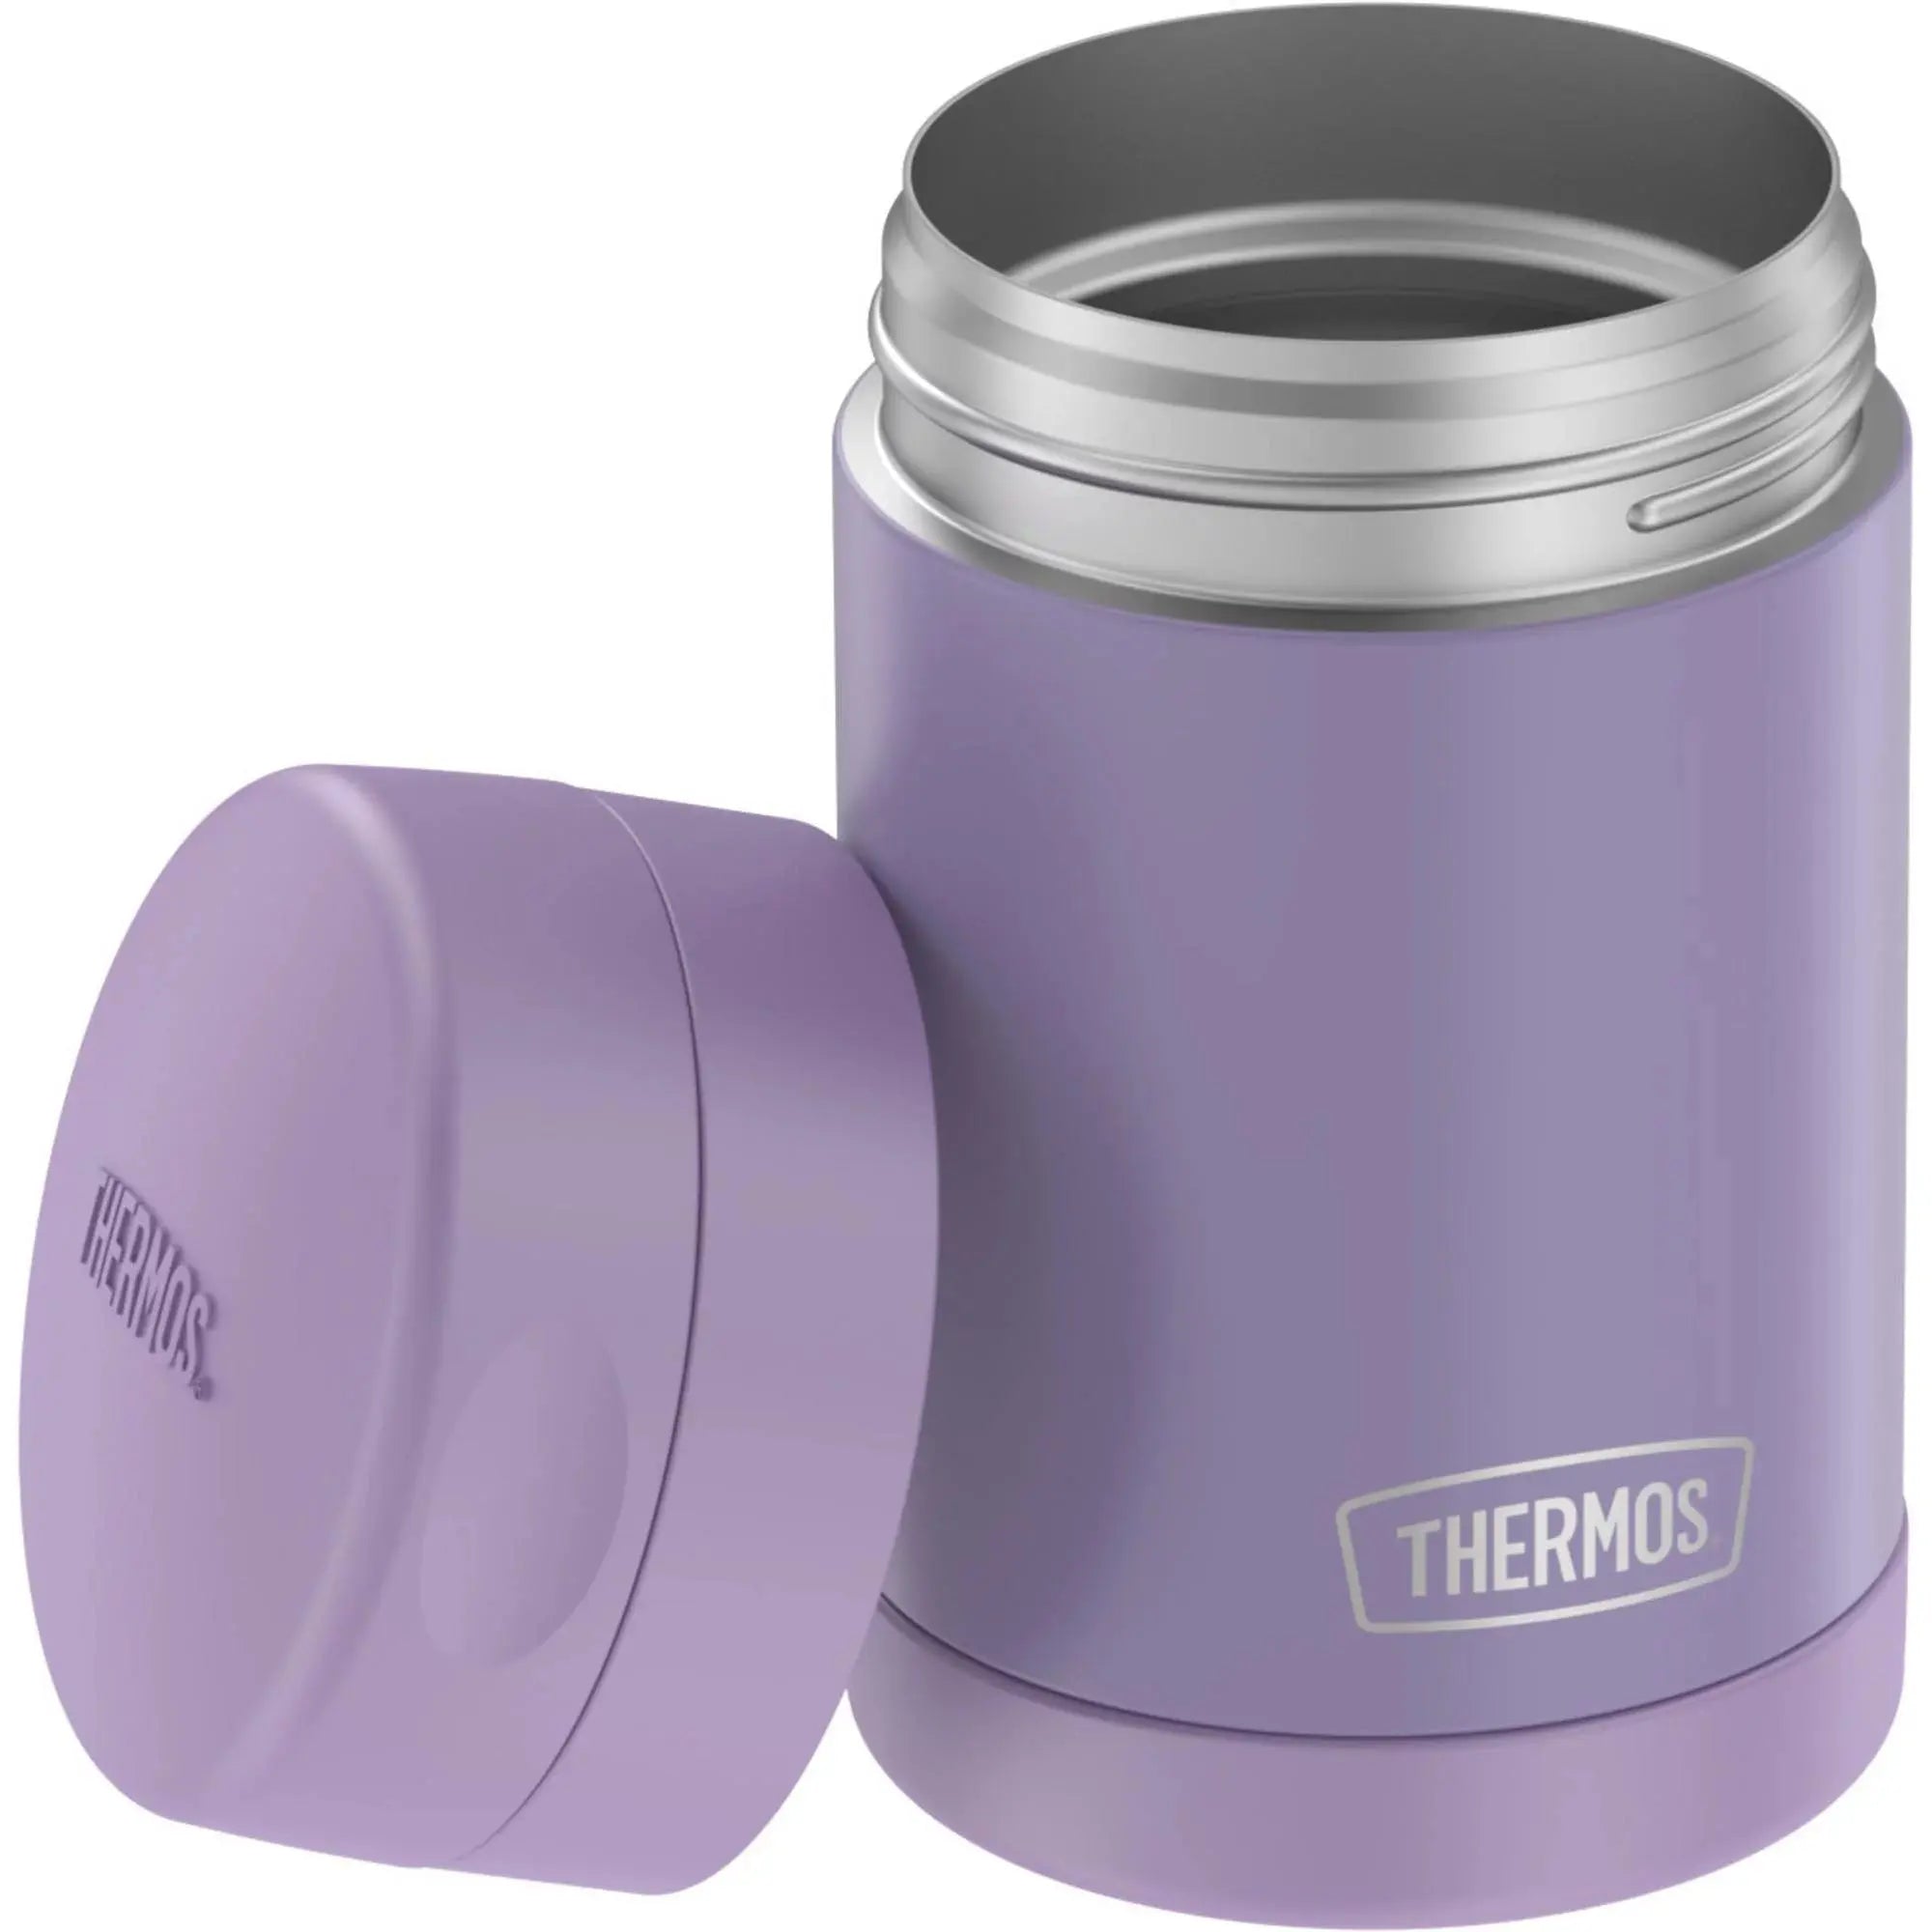 Thermos 16 oz. Vacuum Insulated Stainless Steel Food Jar with Spoon - Lavender Thermos